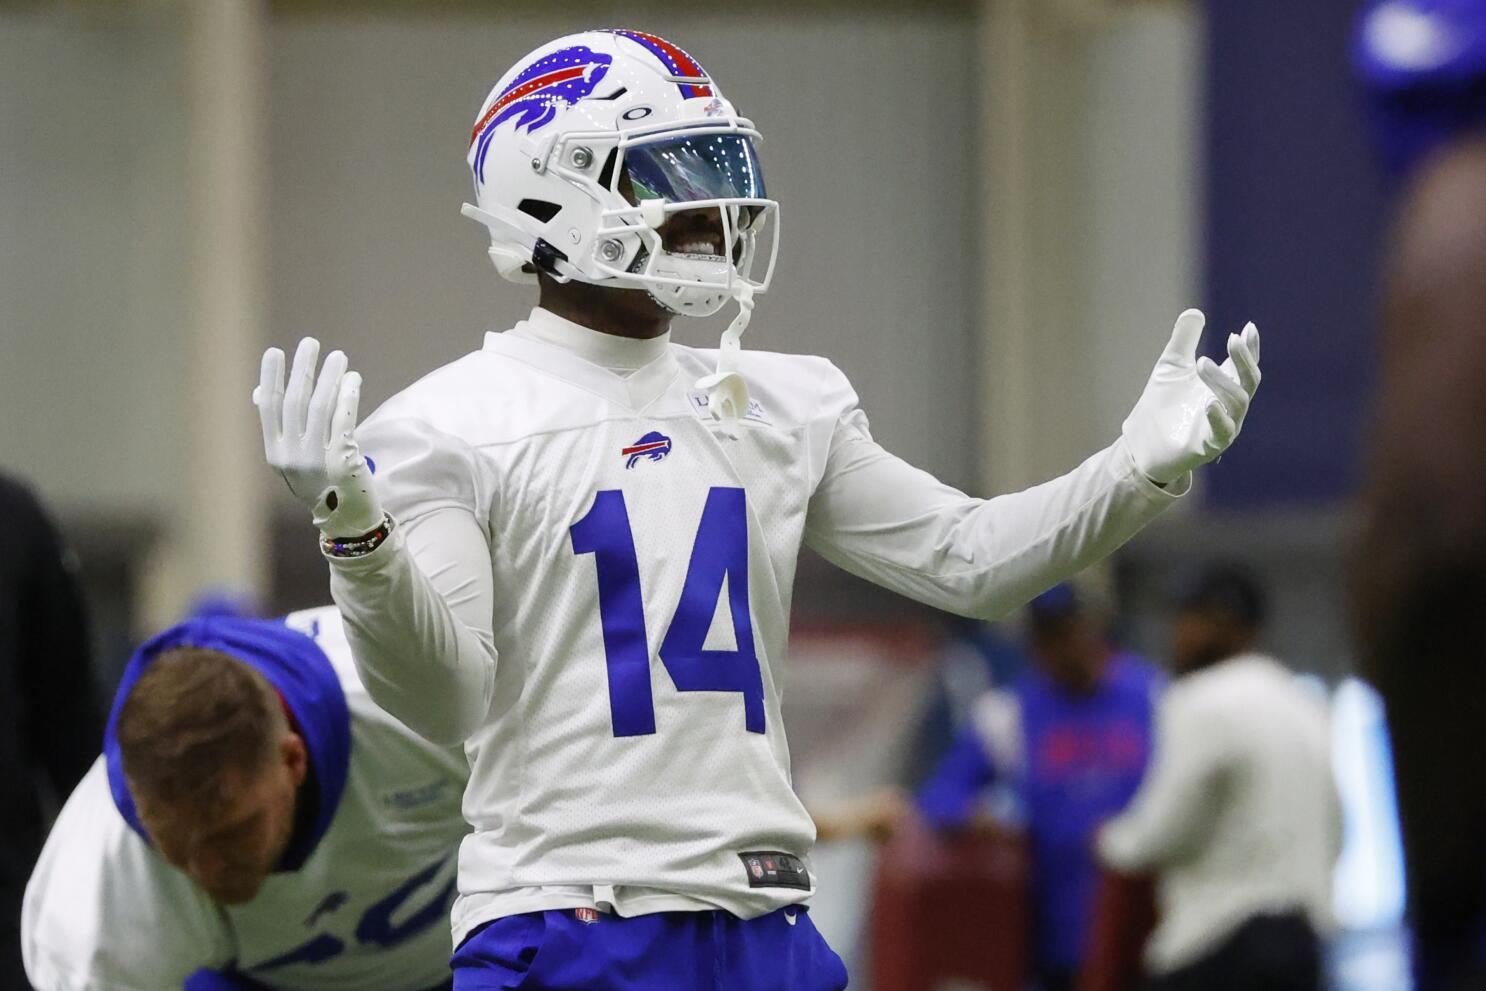 NFL Trade Rumors: Stefon Diggs to Cowboys? Bills WR addresses his